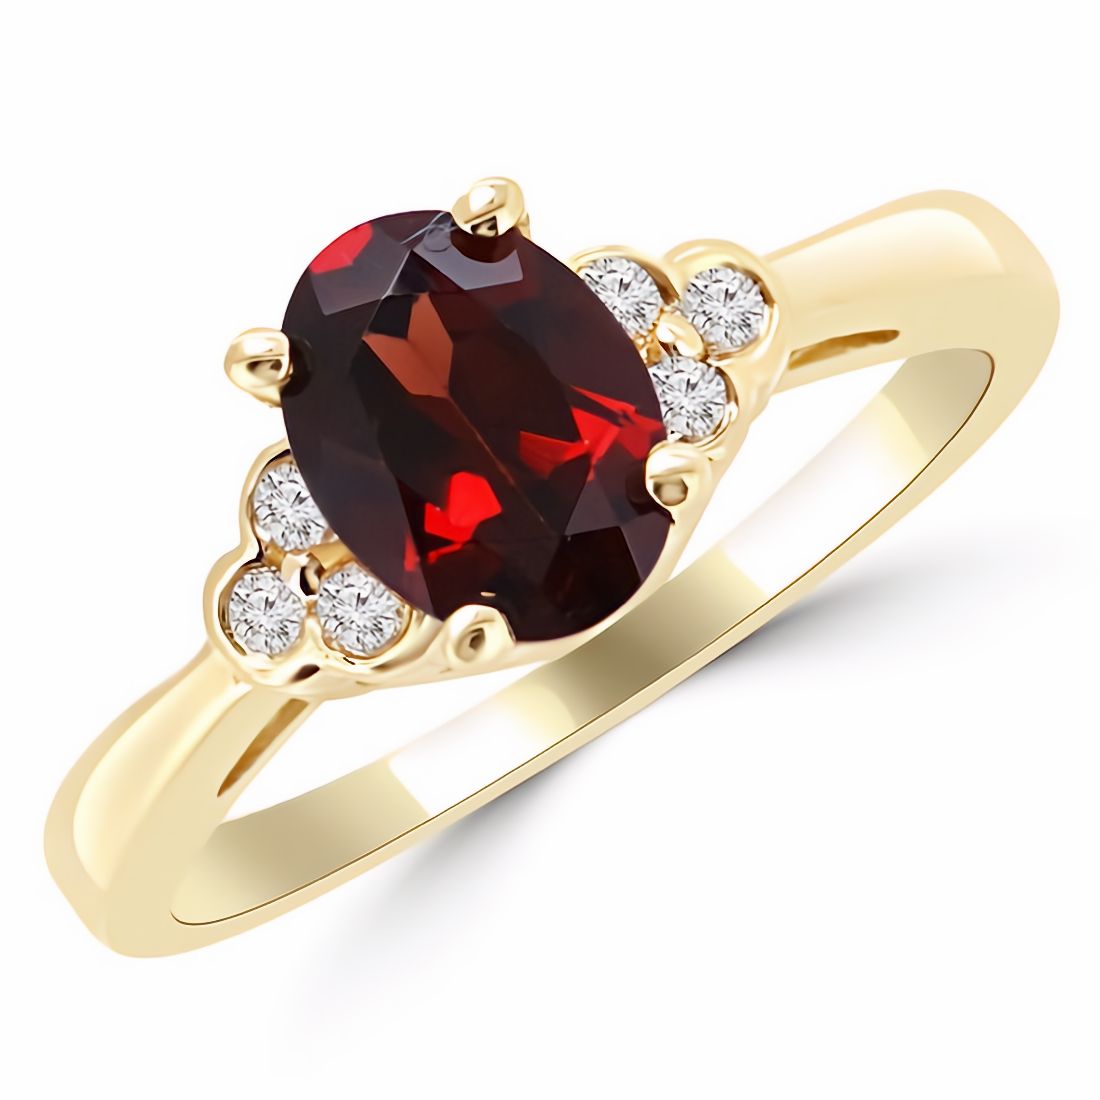 Oval Red Garnet Gemstone Ring in Recycled Eco Friendly Gold – Madelynn  Cassin Designs